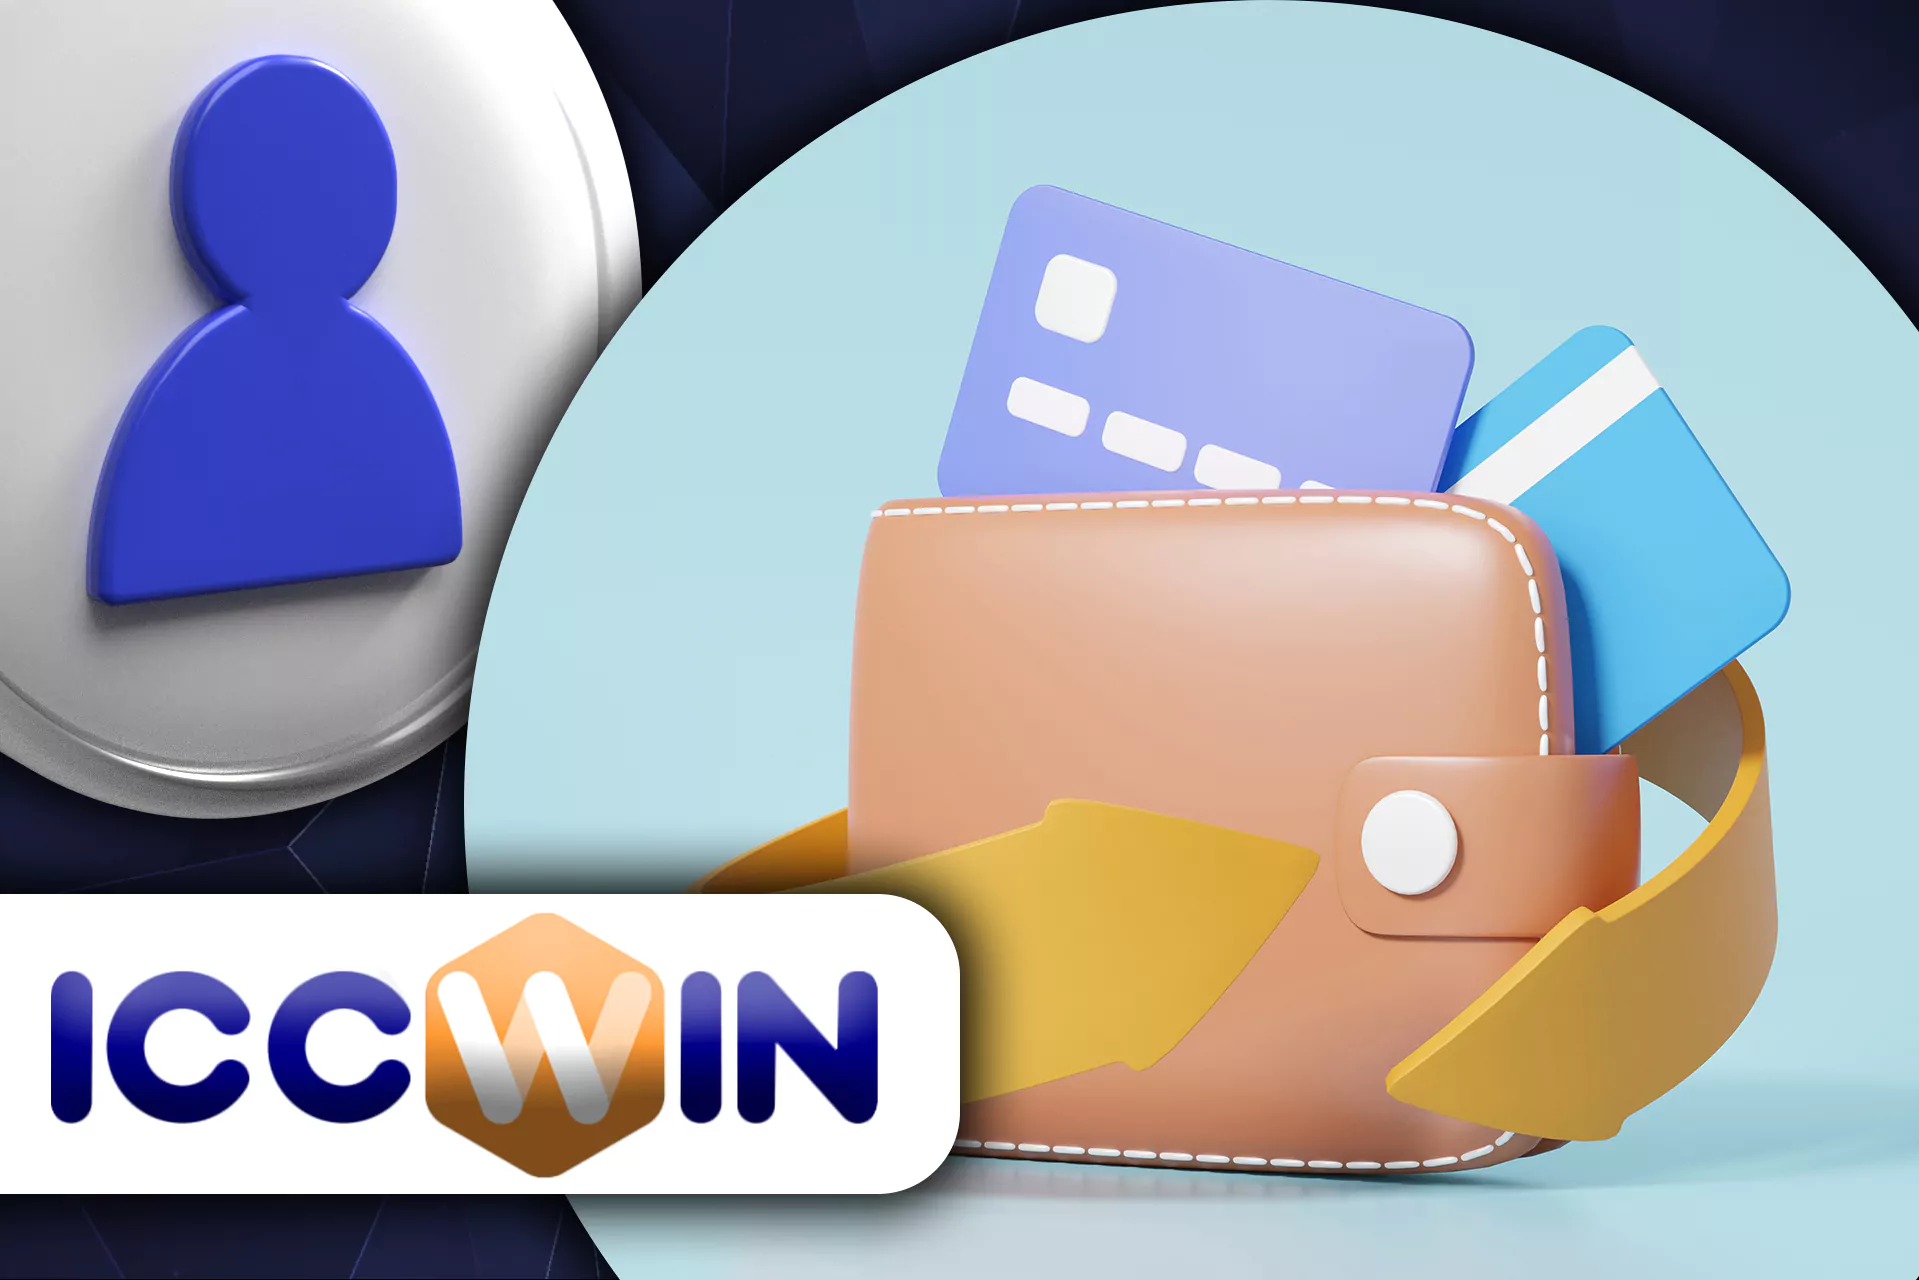 There are some conditions you should meet to withdraw money from ICCWIN.